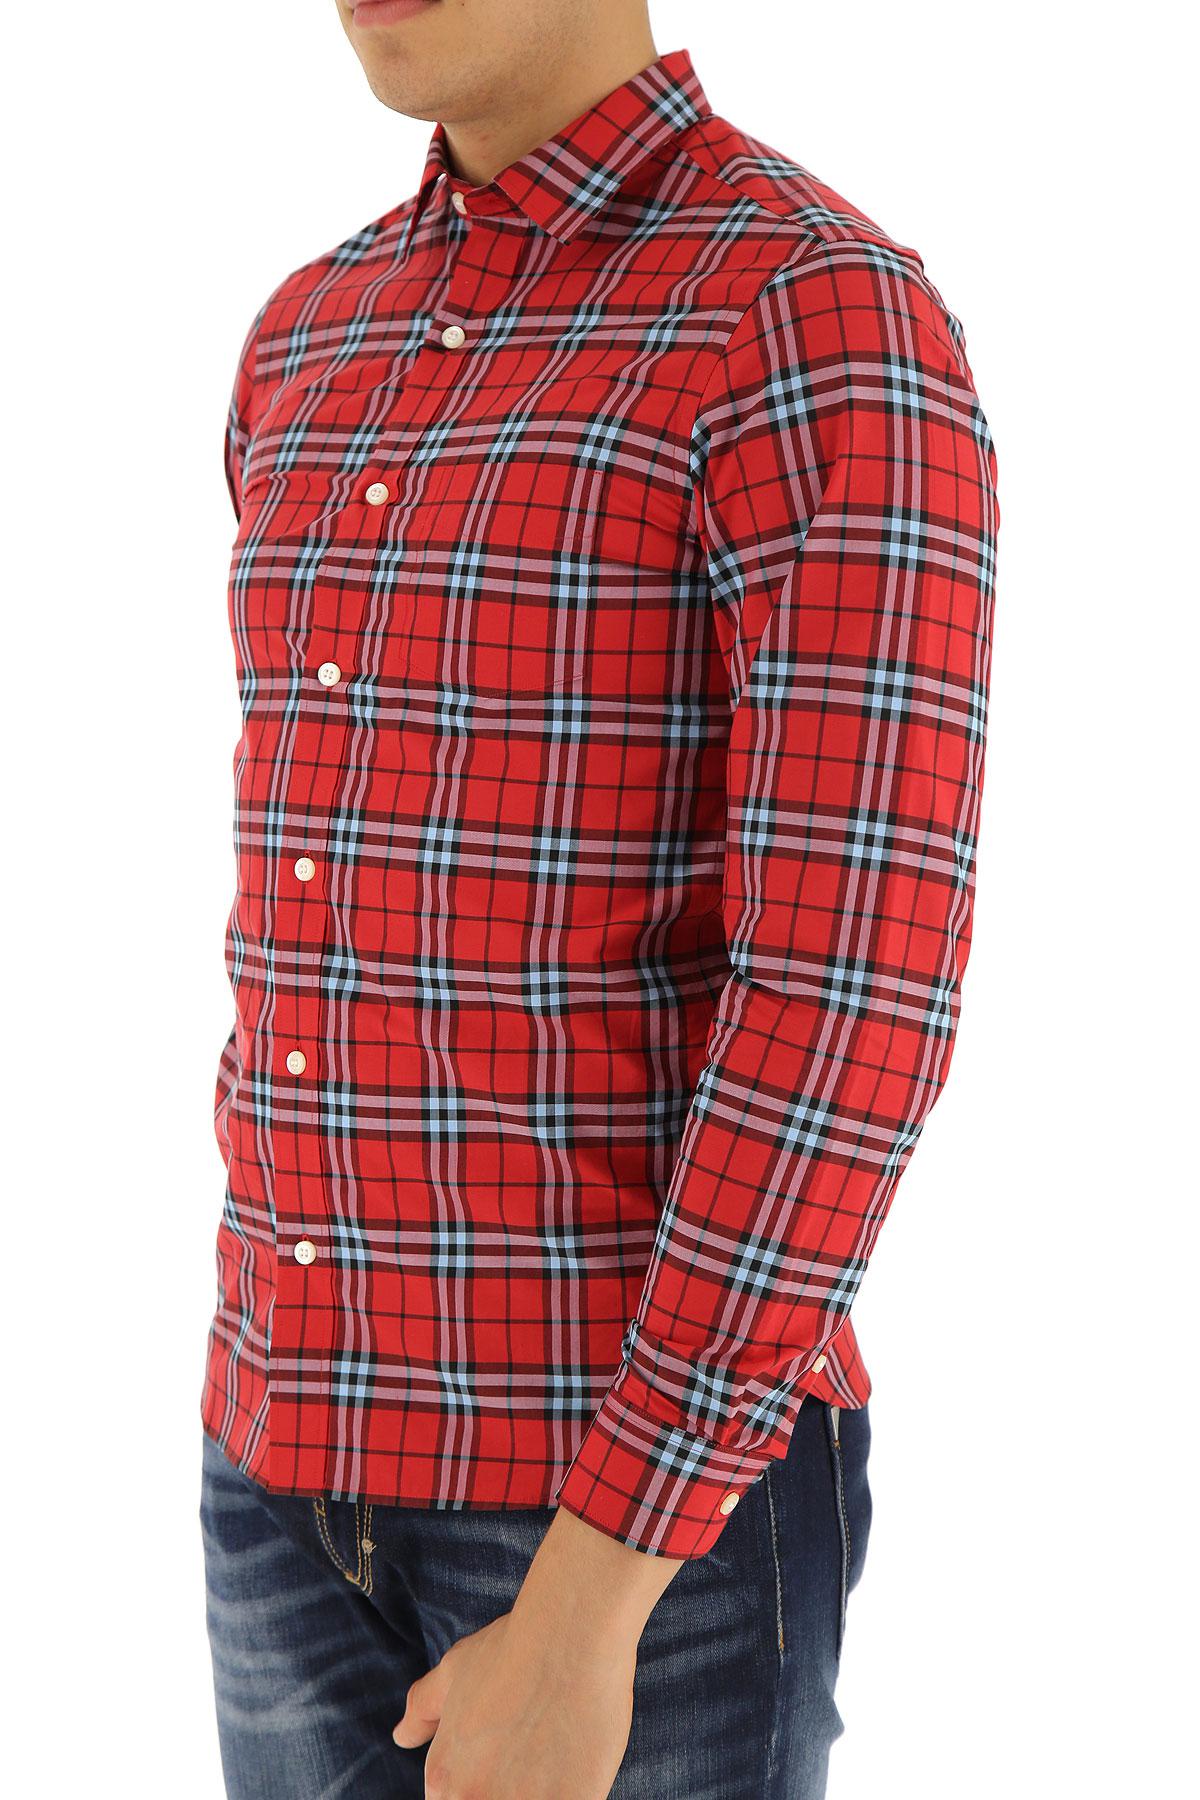 Burberry Vintage Check Cotton Shirt in Red for Men - Lyst